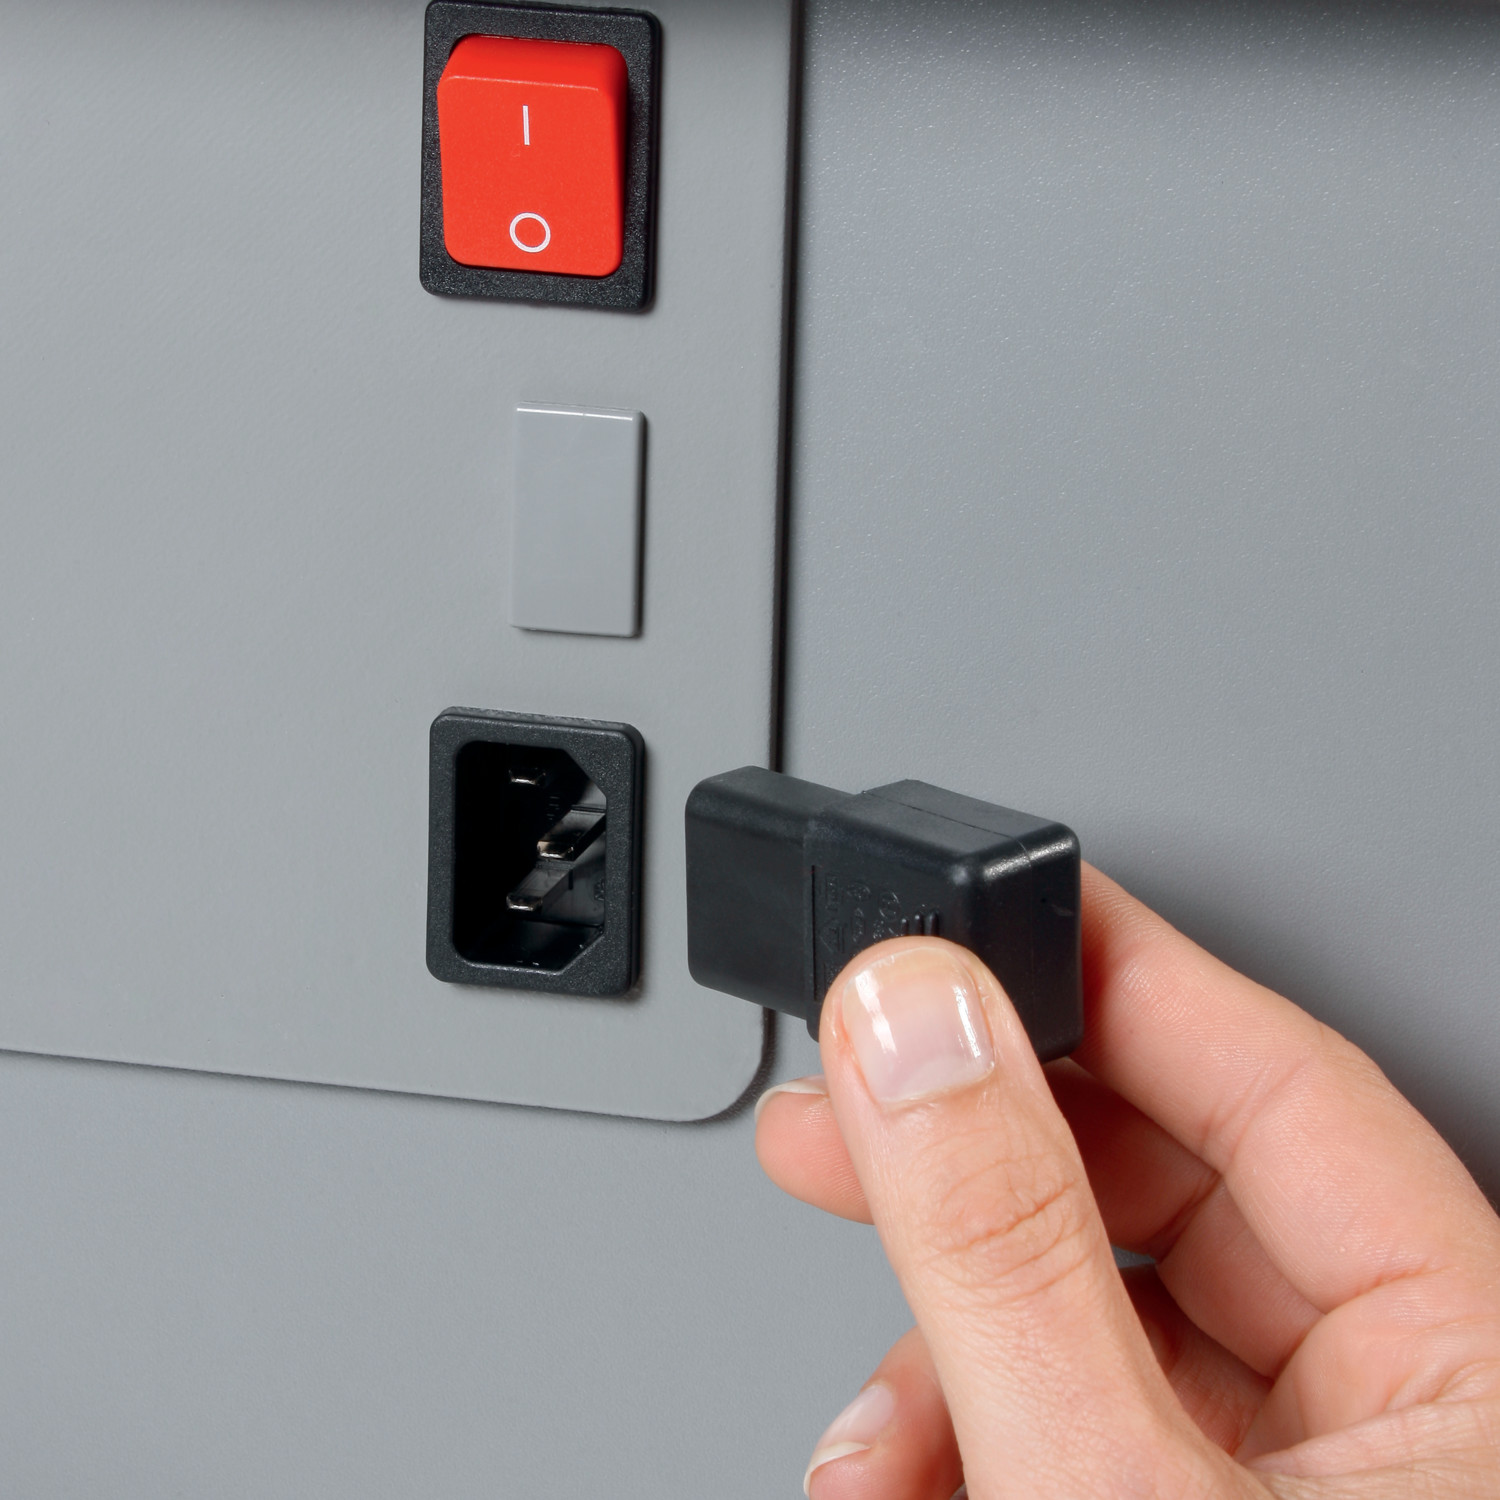 Detachable IEC power plug makes the document shredder quick and easy to move from A to B